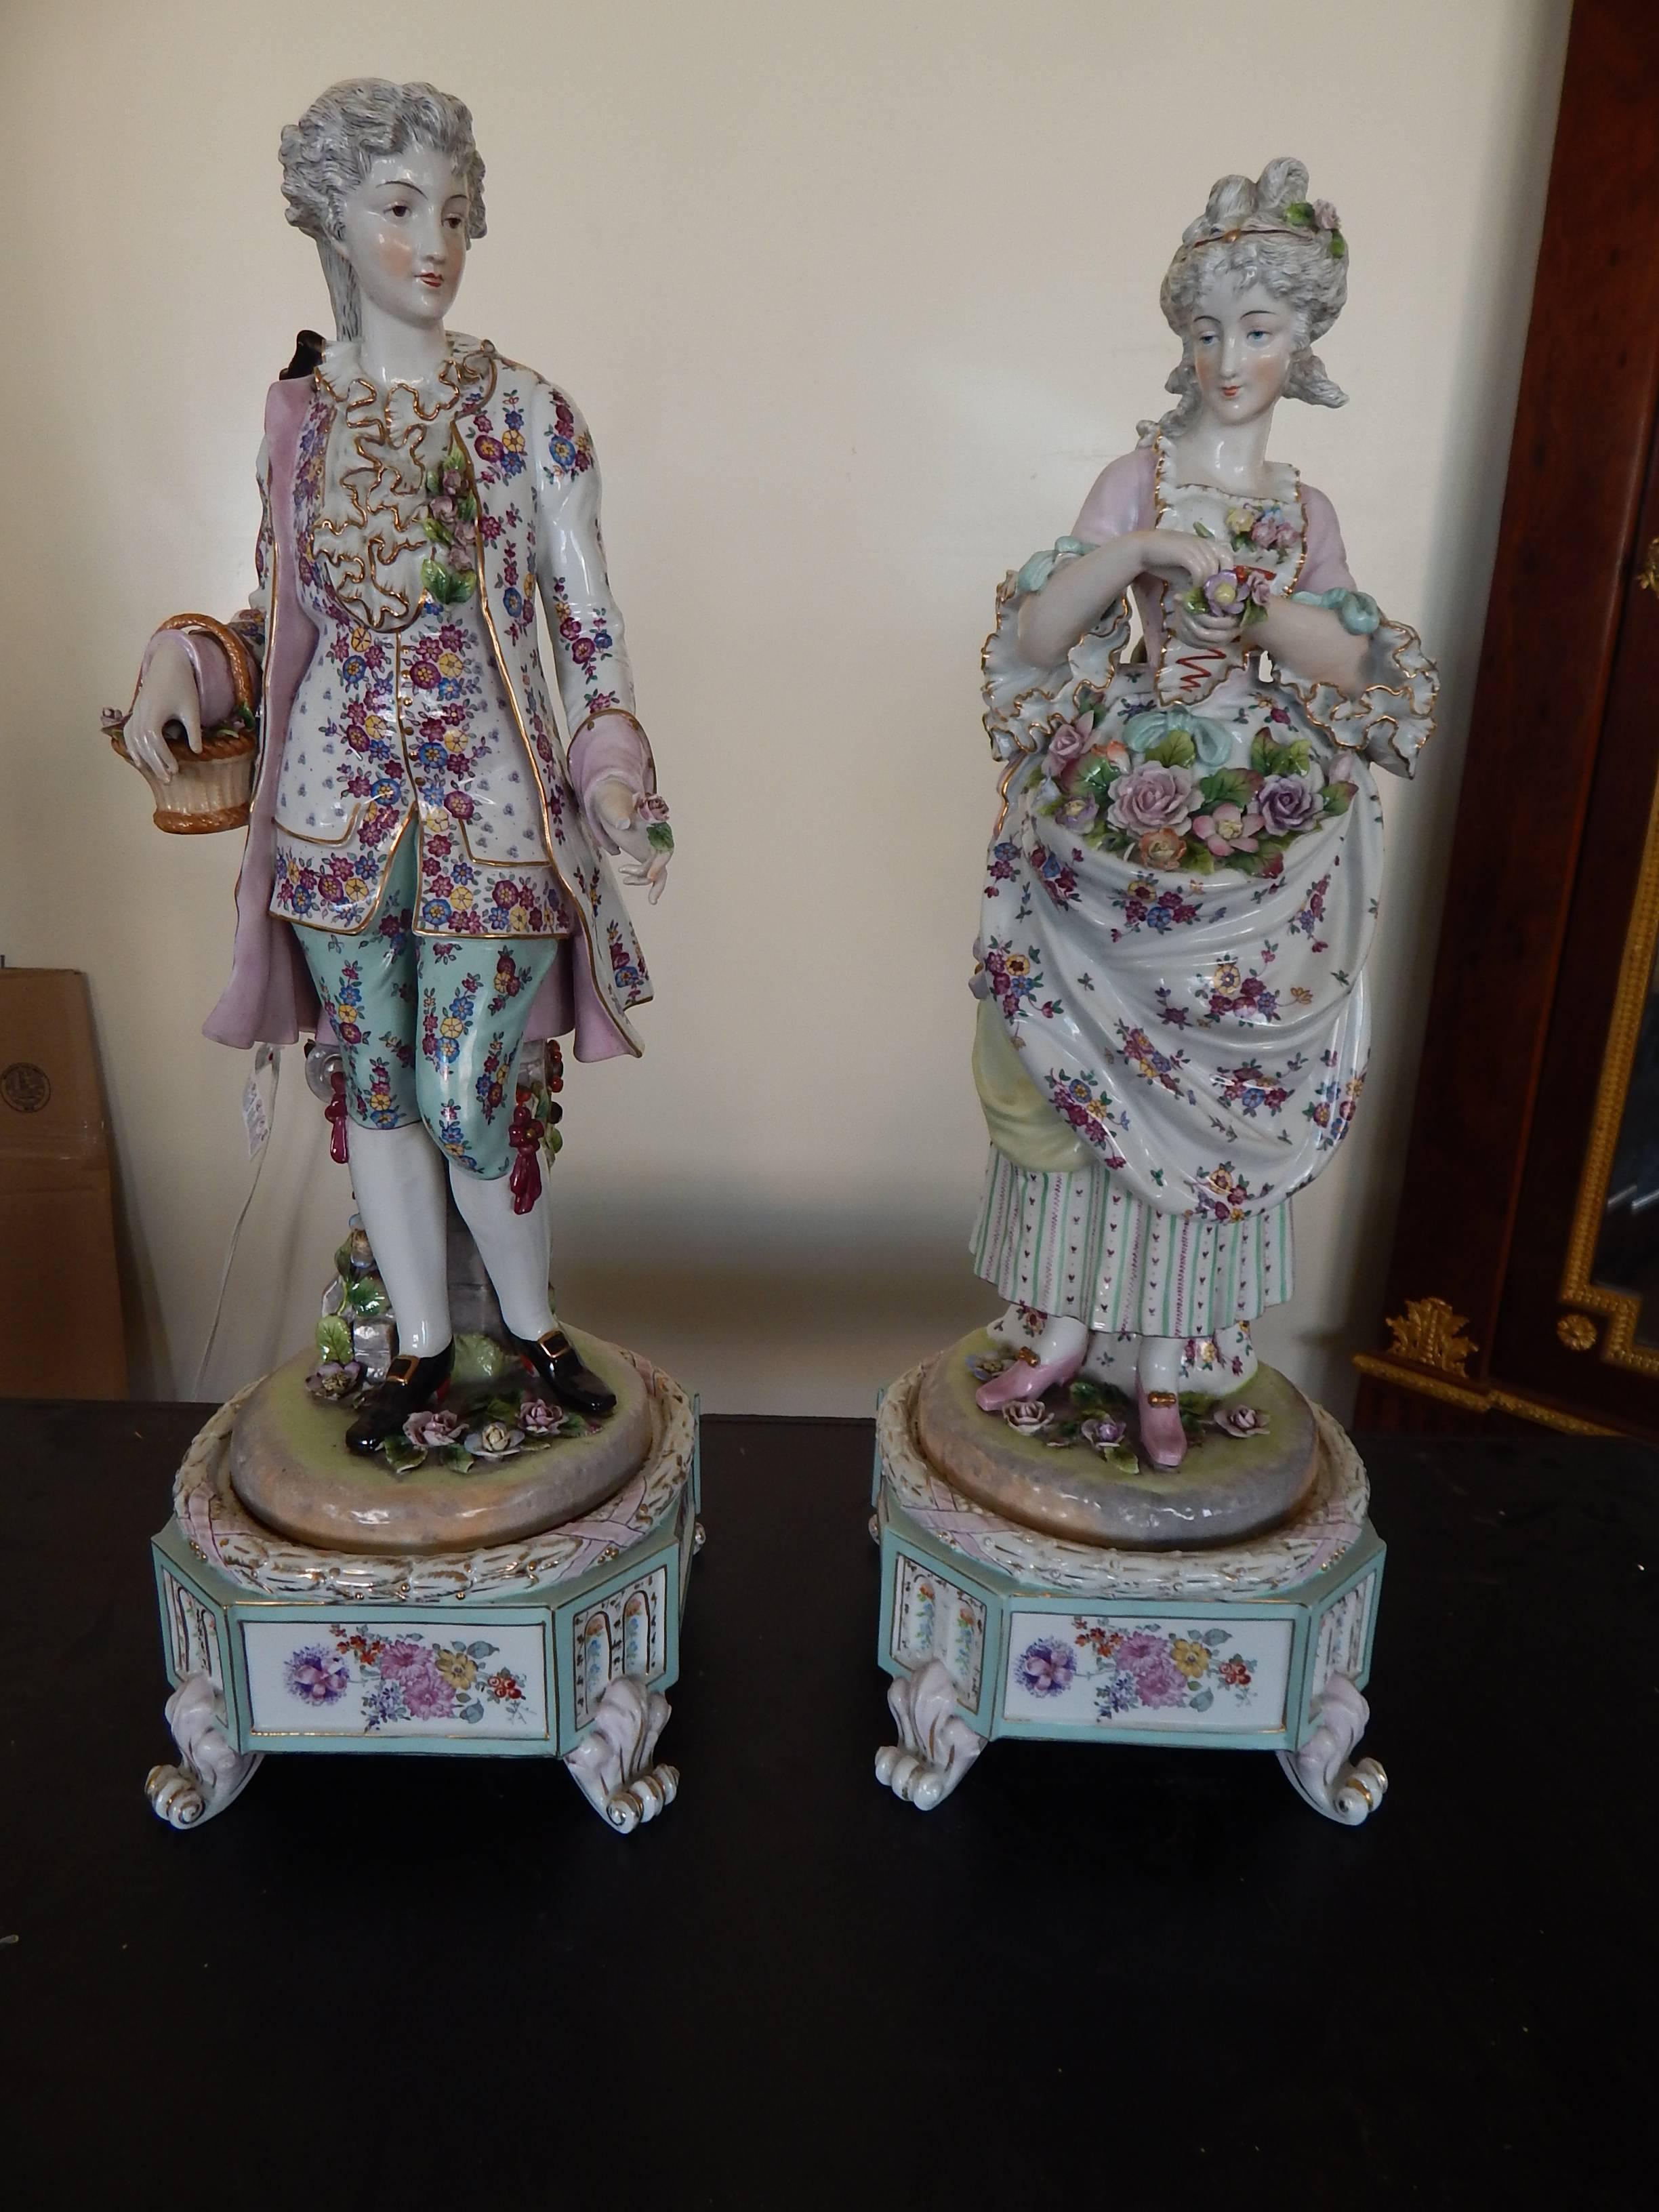 20th Century Huge Pair of Meissen Style Hand-Painted Porcelain Figures